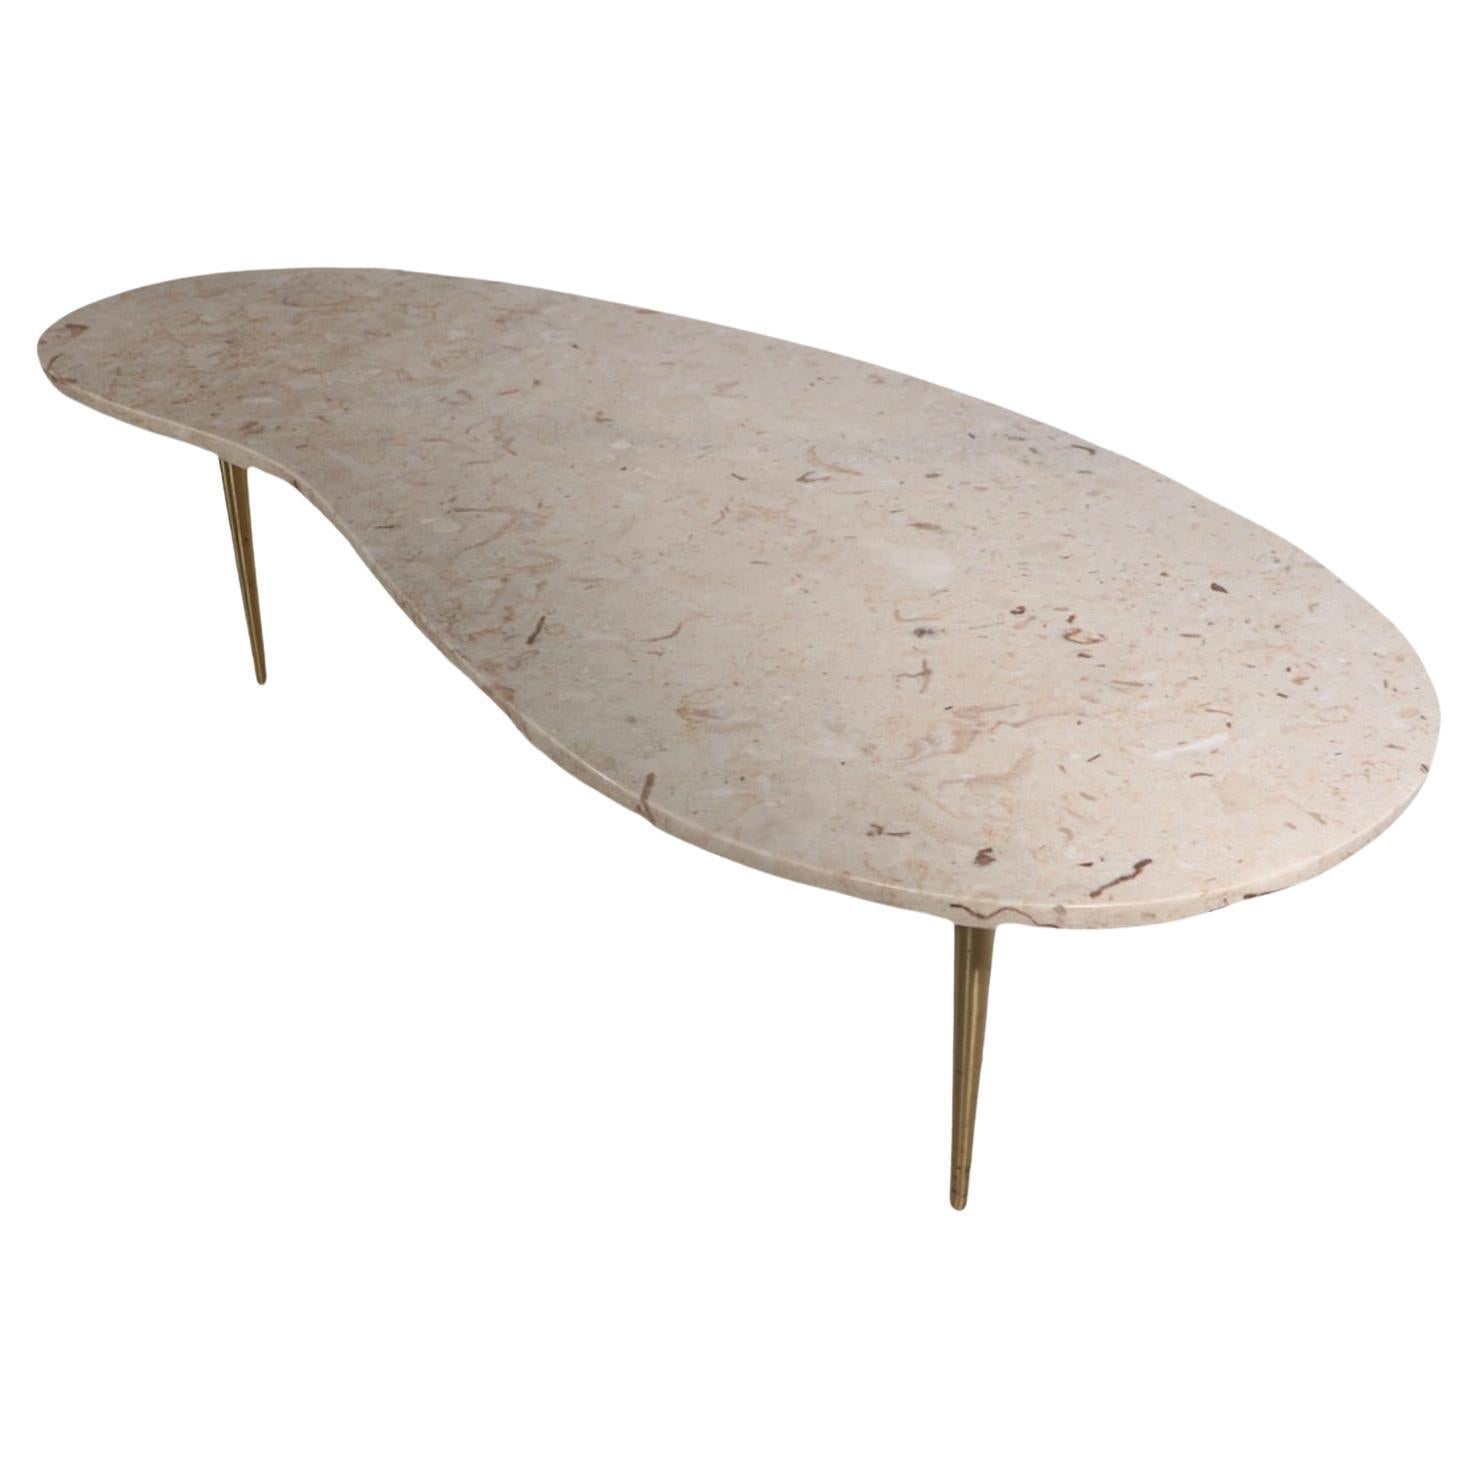 Voguish modern marble top coffee, cocktail table having a thick ( 1 in. ) kidney shaped top, which rests of splayed tapered pole brass legs. The marble has an inconsequential chip at the bottom edge, please see images. 
The marble is marked made in